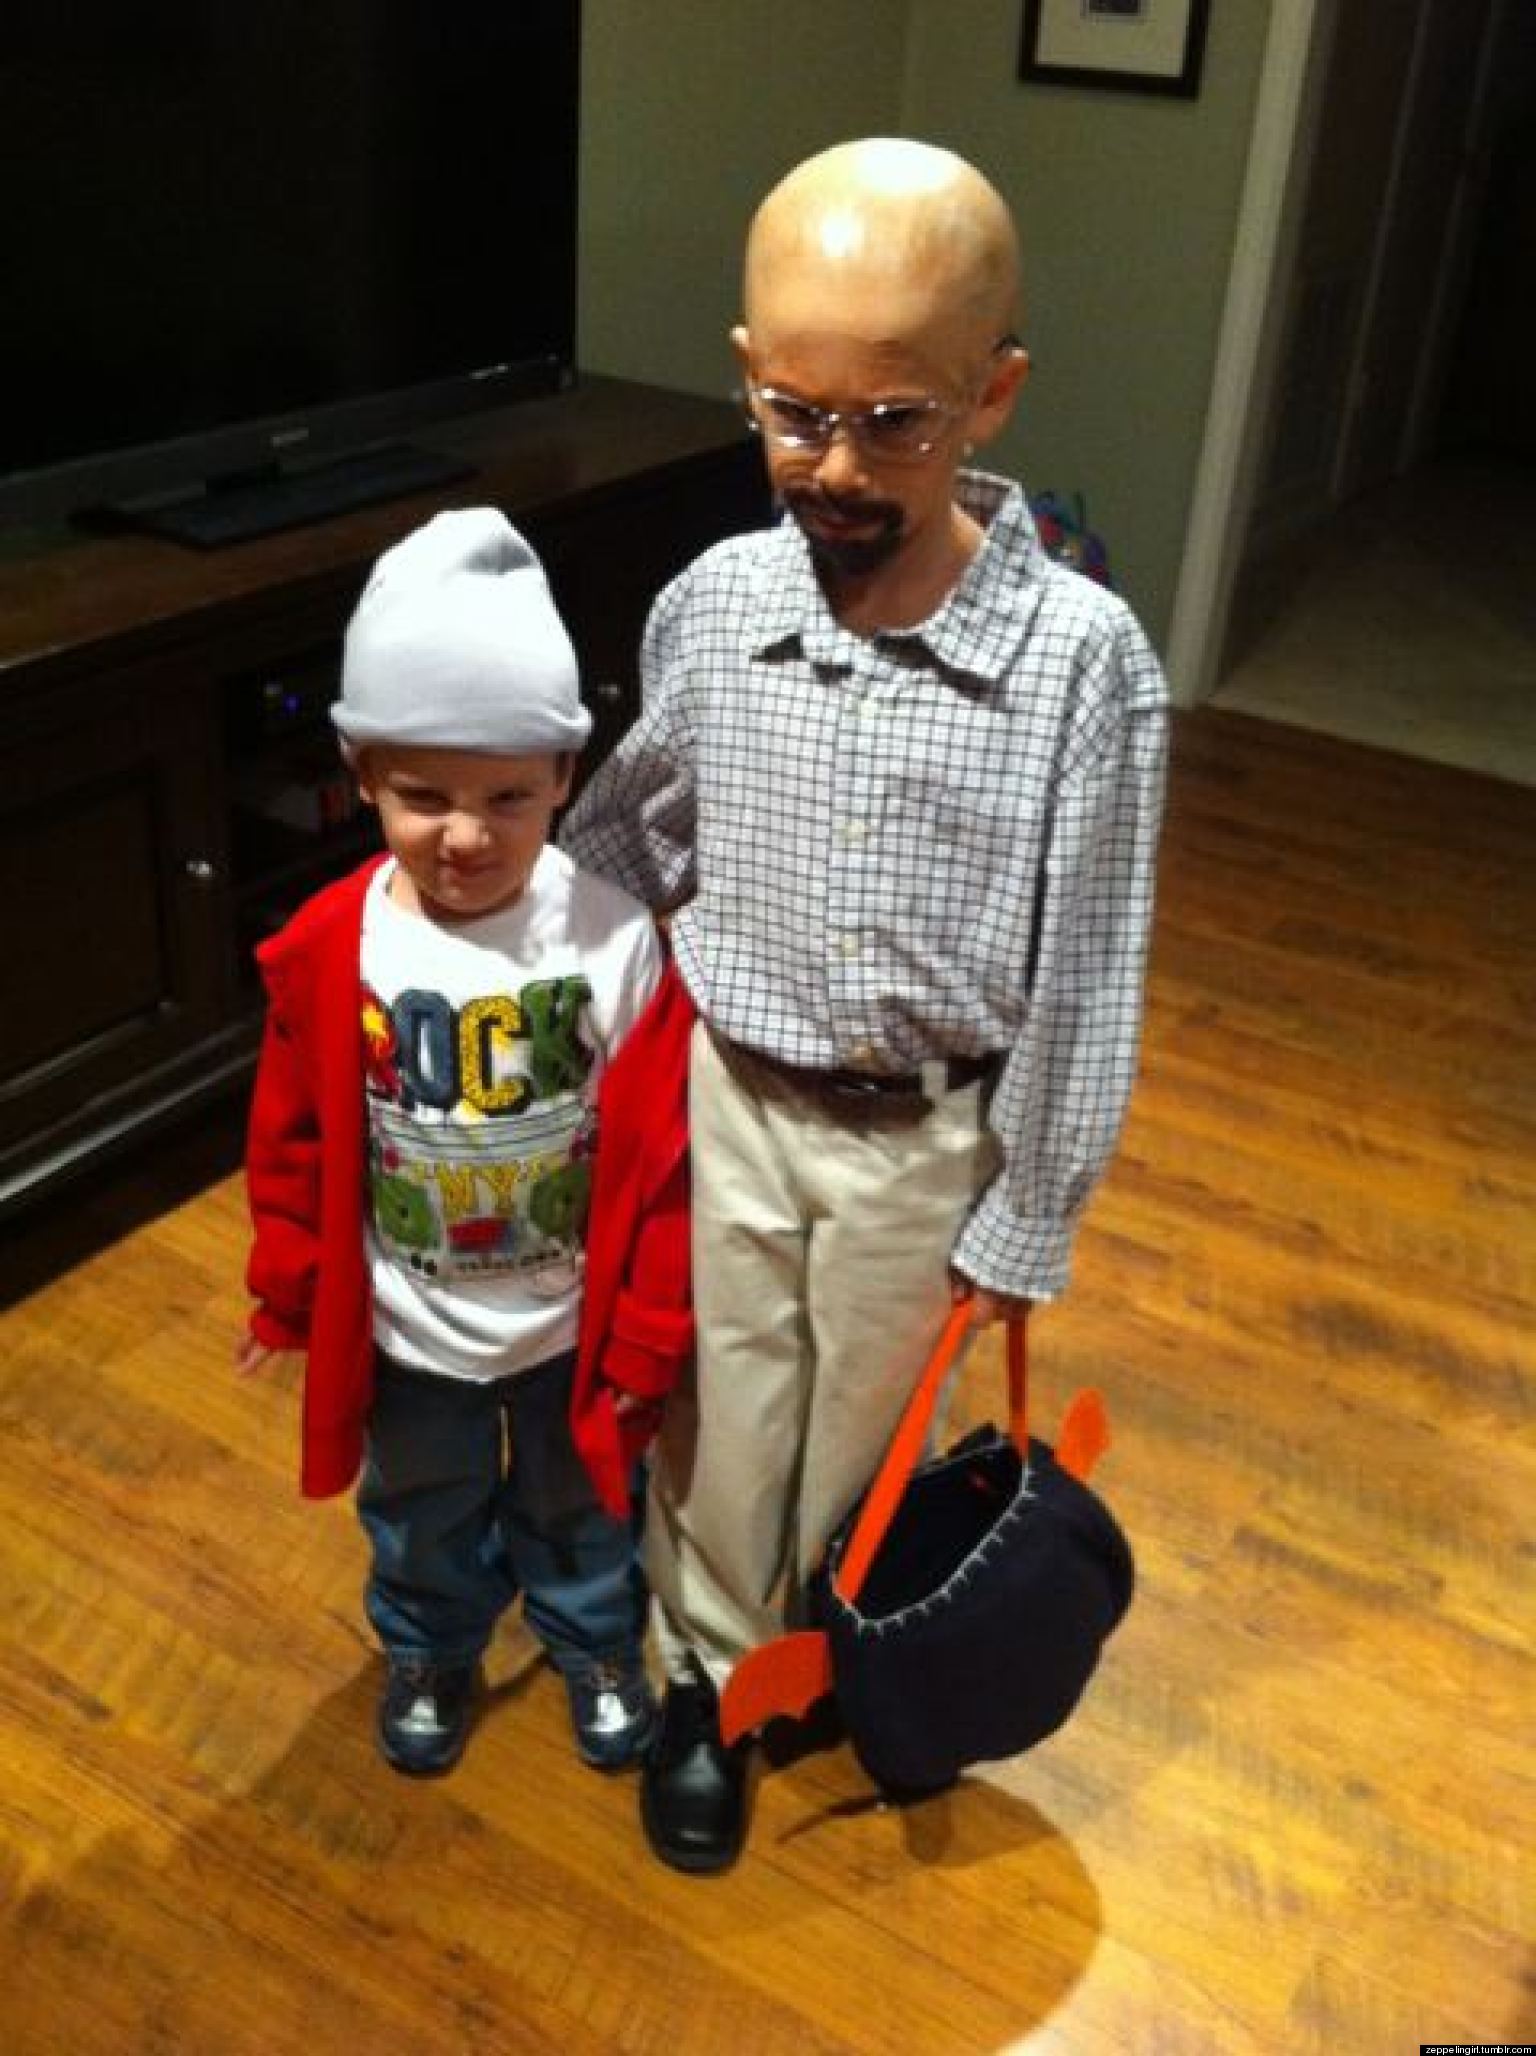 'Breaking Bad' Halloween Costume For Kids Because Why Not? (PHOTO